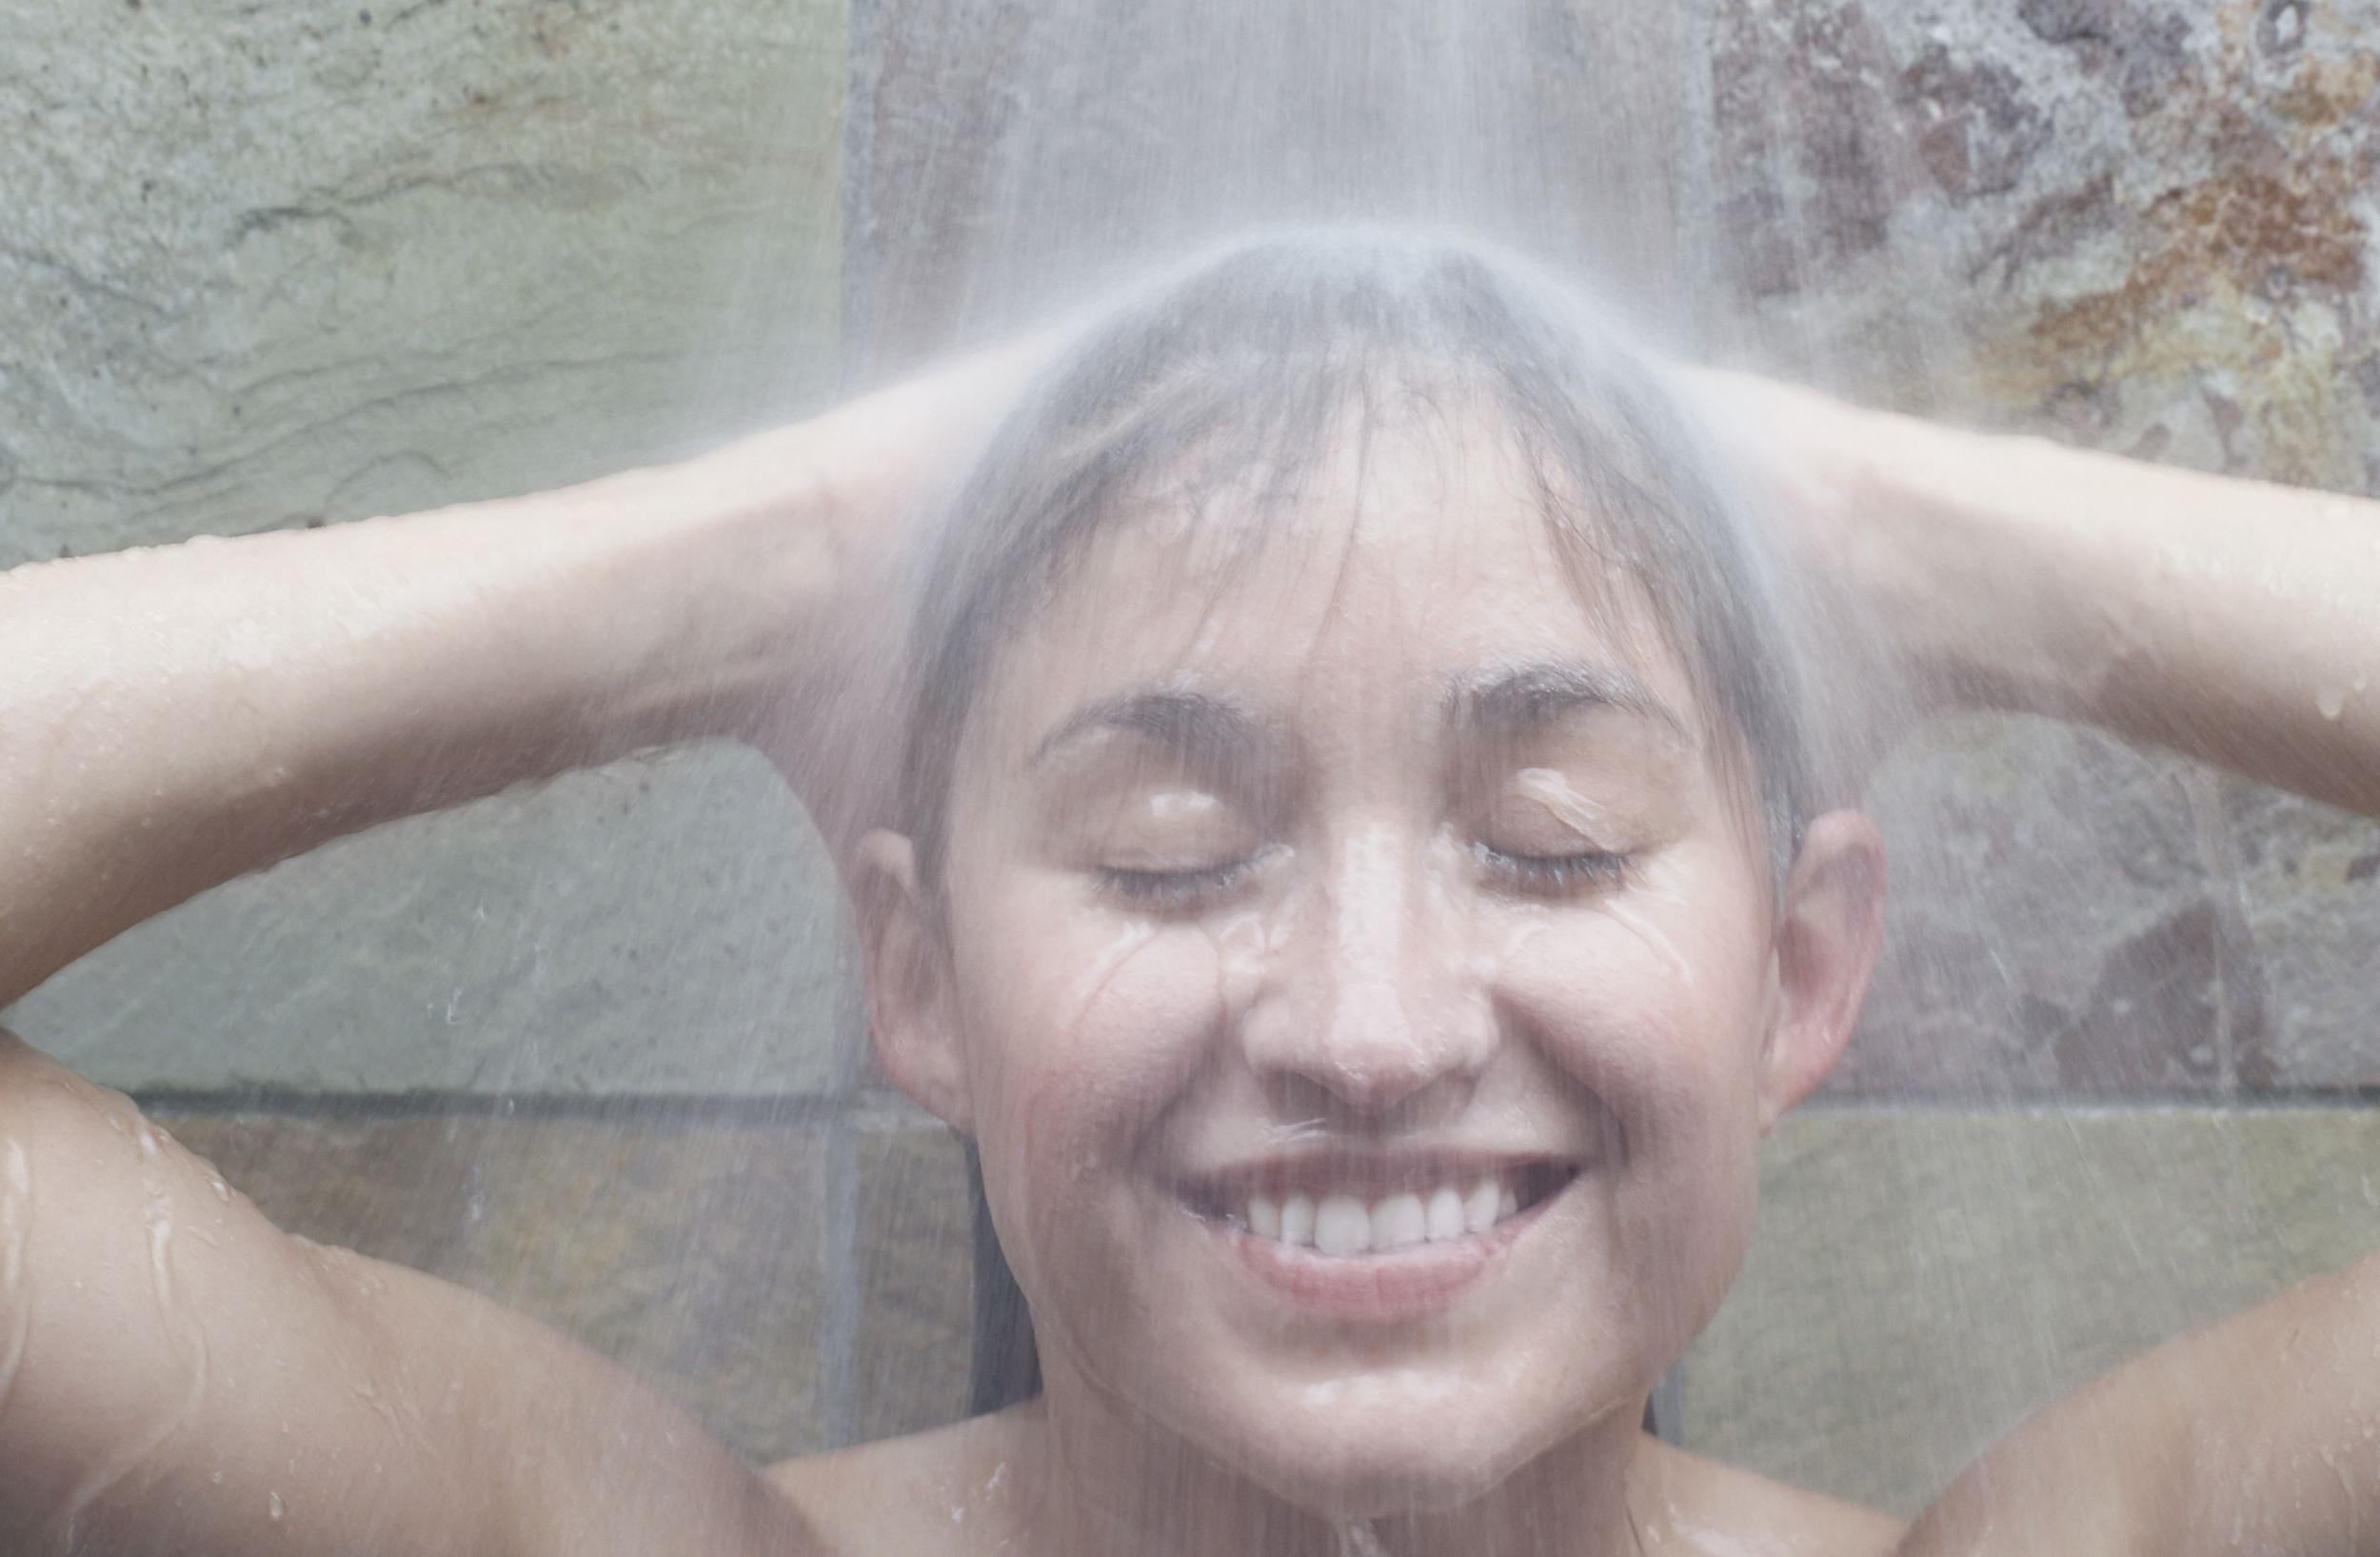 Your showering habits could be reeking havoc with your skin